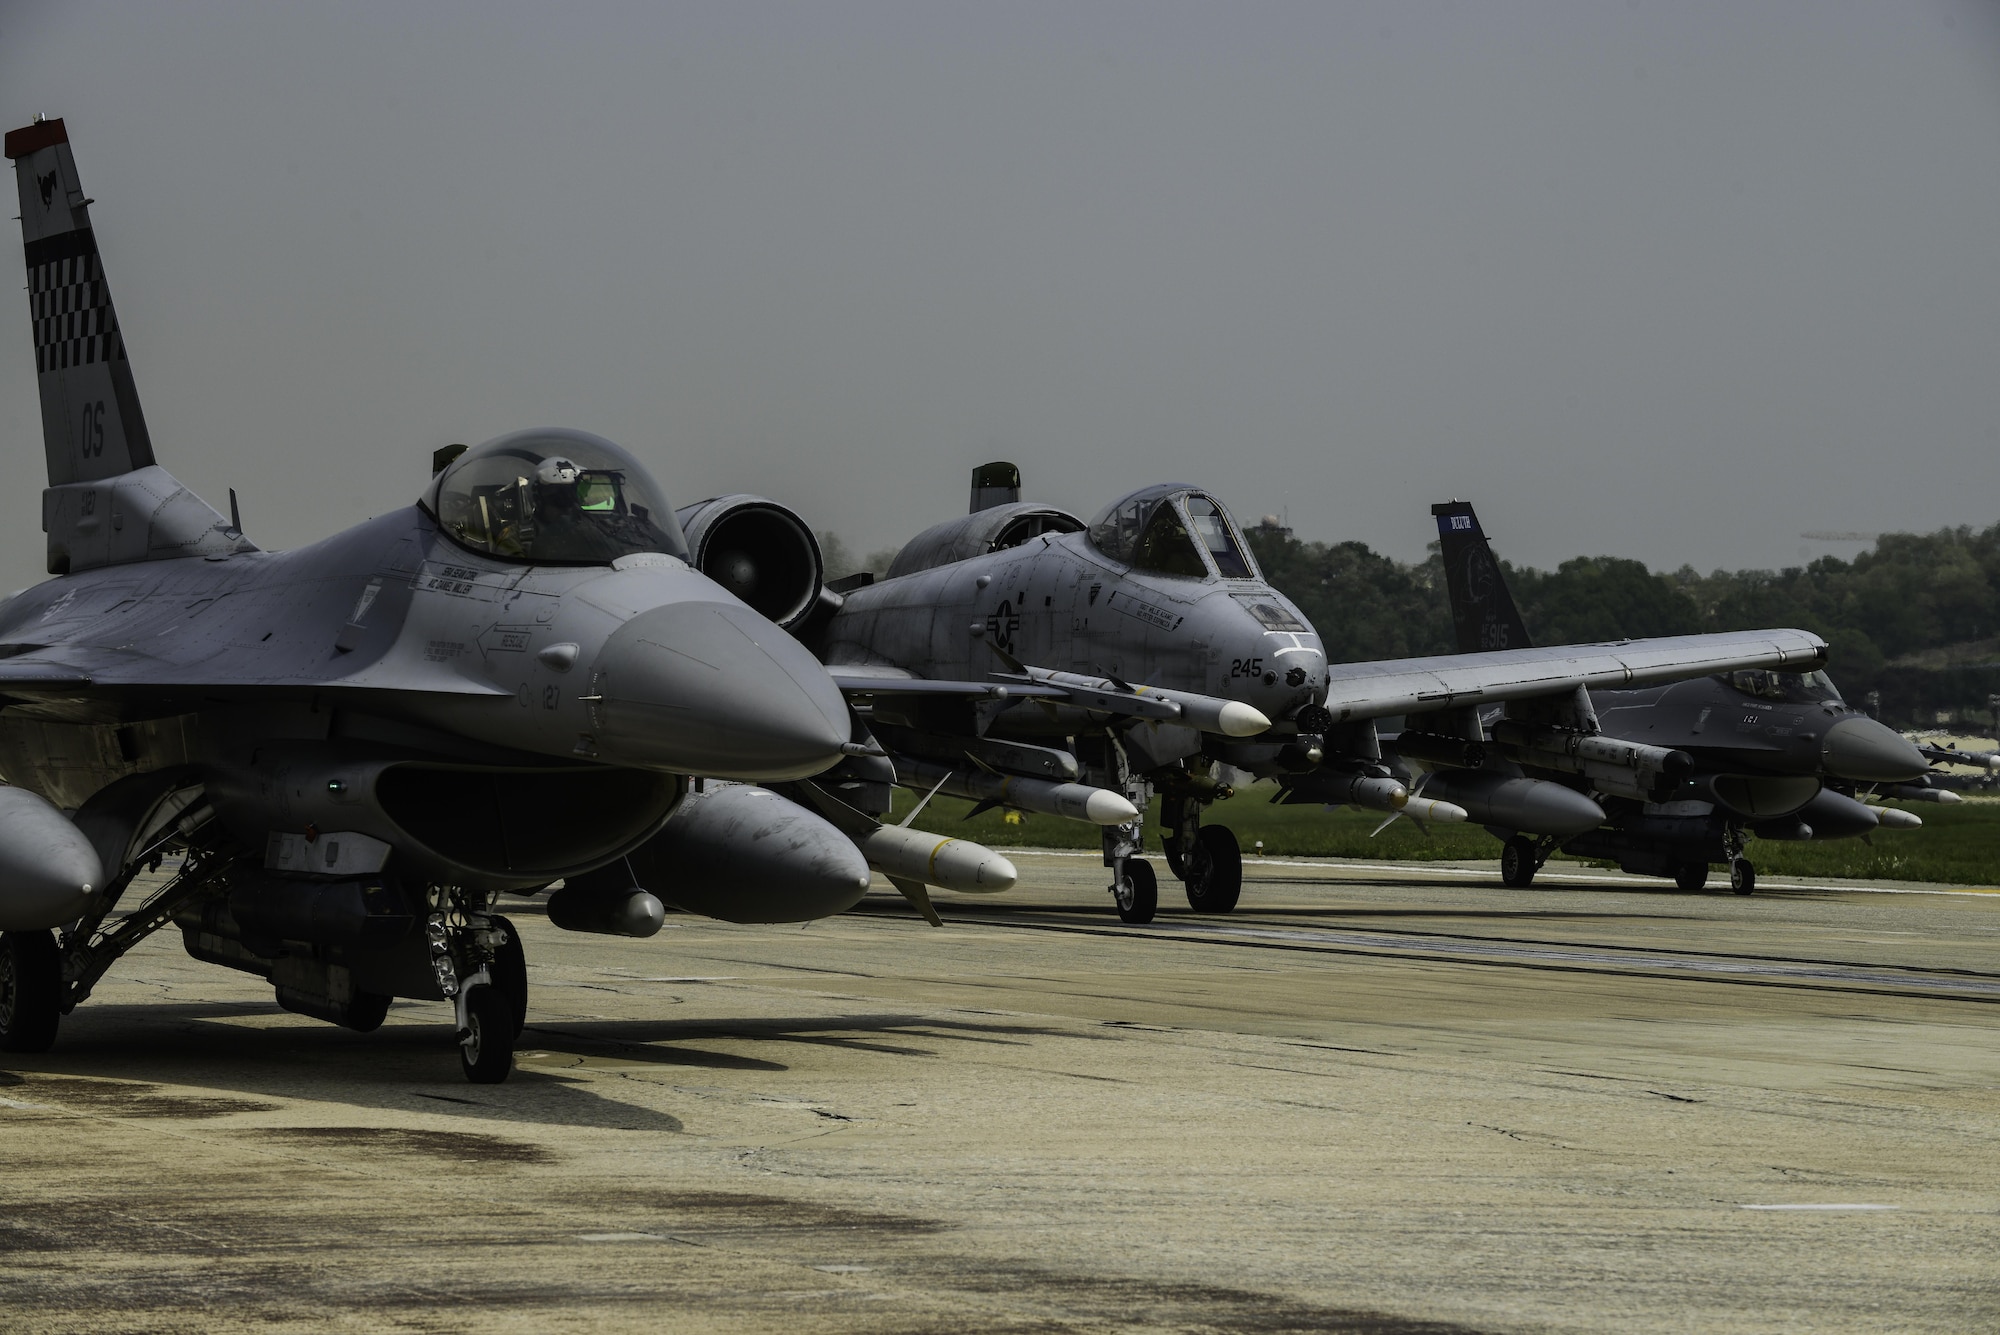 A-10 Thunderbolt II and F-16 Fighting Falcon fighter aircraft perform an 'Elephant Walk' on the runway this week during Exercise Beverly Herd 16-01 at Osan Air Base, Republic of Korea. The Elephant Walk was a demonstration of U.S. Air Force capabilities and strength and showcases the wing's ability to generate combat airpower in an expedient manner in order to respond to simulated contingency operations. The A-10 Thunderbolt II aircraft are the 25th Fighter Squadron "Draggins" and the F-16 Fighting Falcon aircraft are the 36th Fighter Squadron "Friends" from the 51st Fighter Wing, Osan AB, ROK; the additional F-16 aircraft are the 179th Fighter Squadron "Bulldogs" from the 148th Fighter Wing out of Duluth Air National Guard Base, Minnesota. (U.S. Air Force photo by Senior Airman Dillian Bamman/Released)